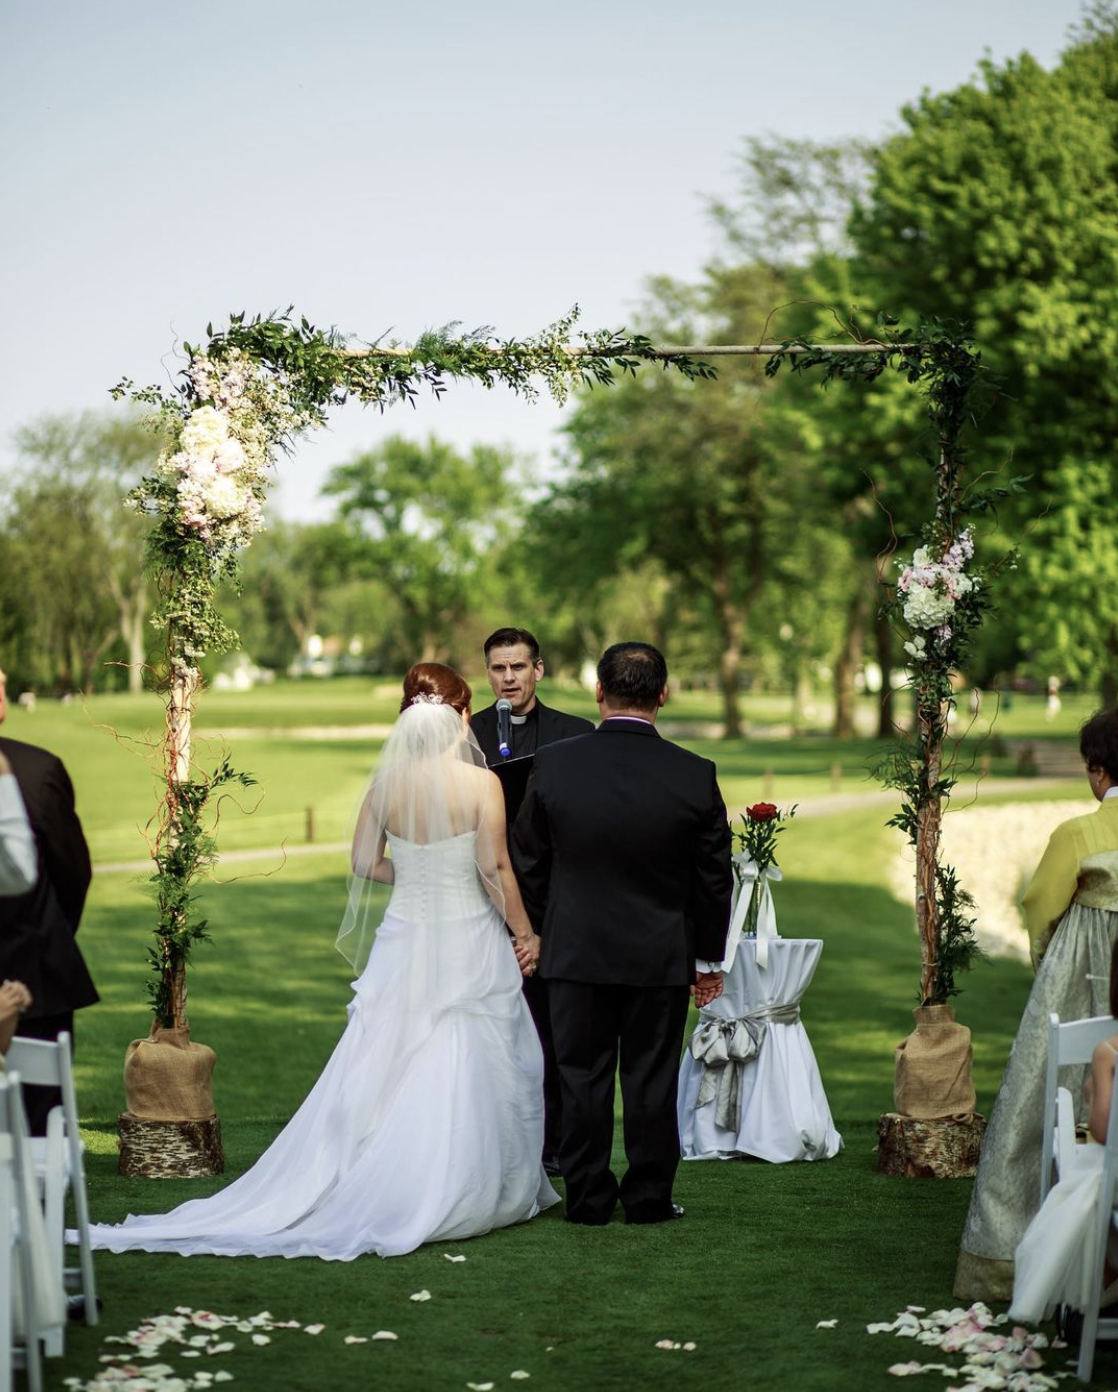 Bride and groom hold hands during wedding ceremony outdoors